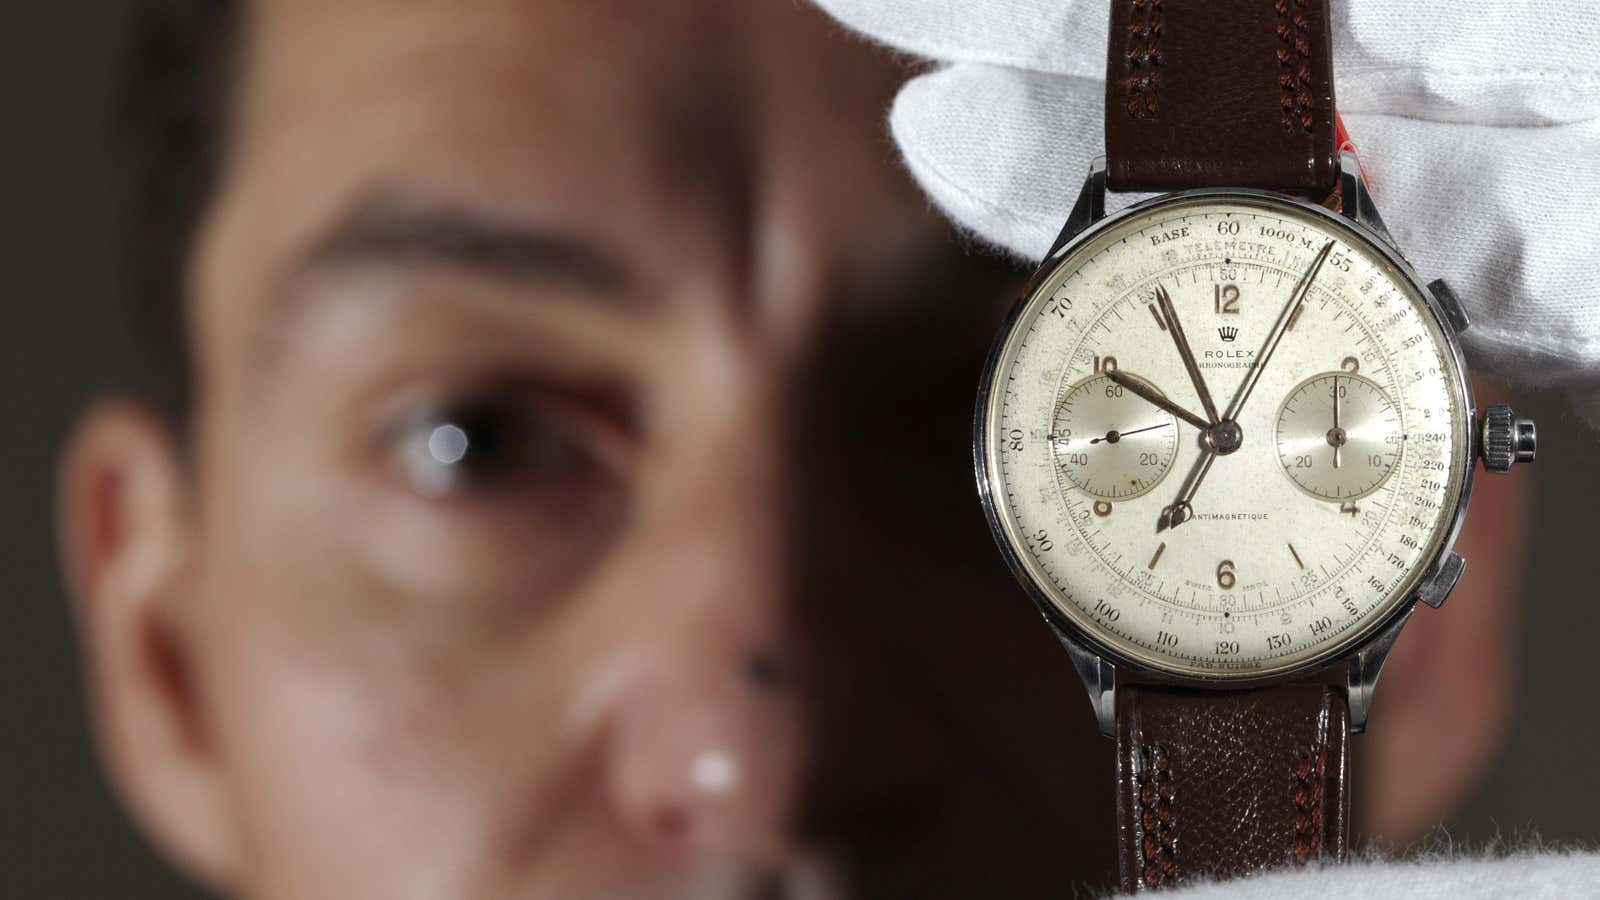 Time to rethink the role of watches, and smartphones, in our lives?